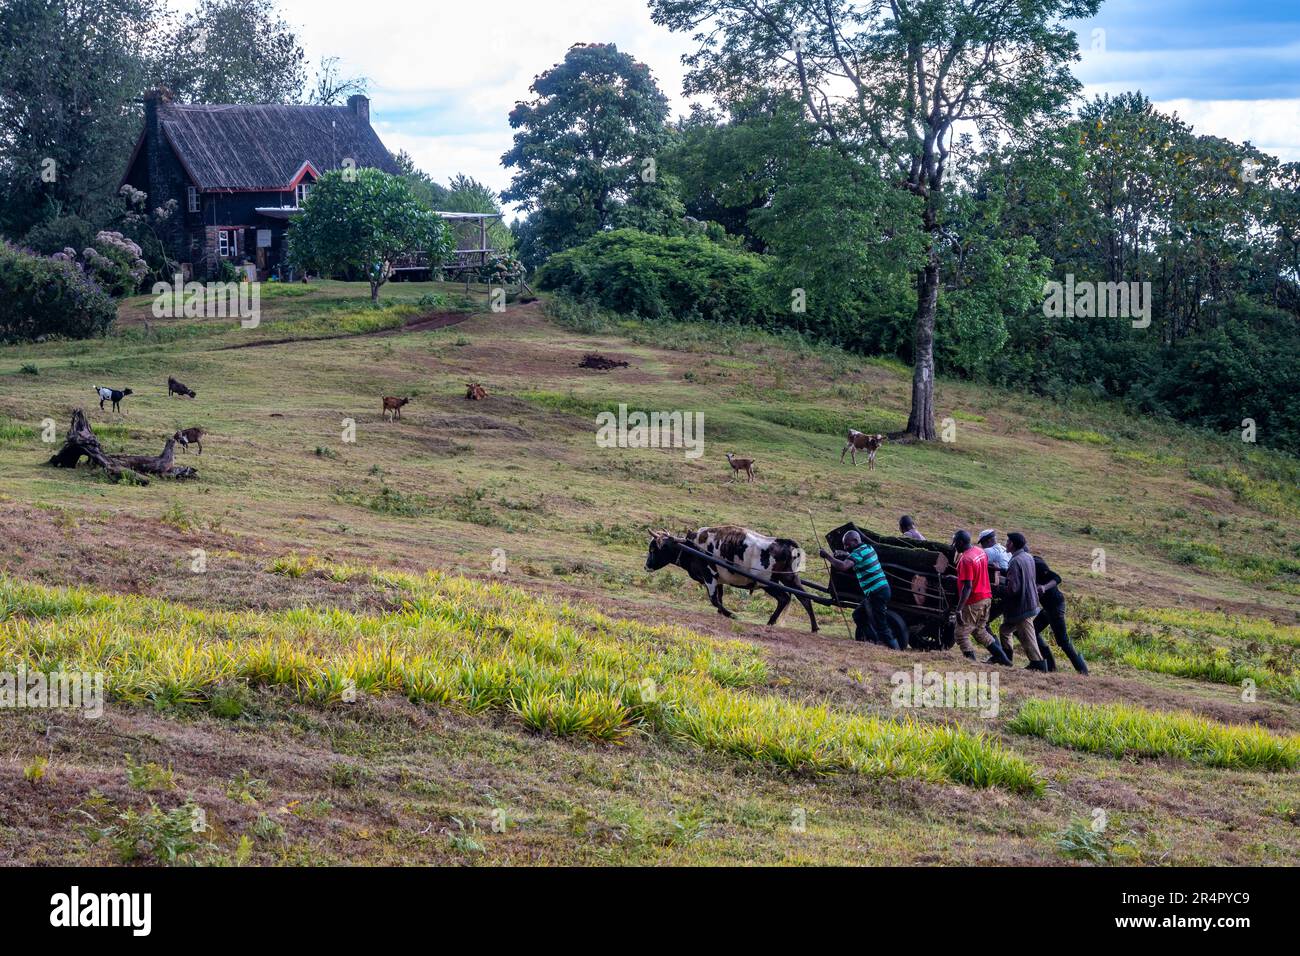 A group of men push a heavily loaded ox cart. Kenya, Africa. Stock Photo